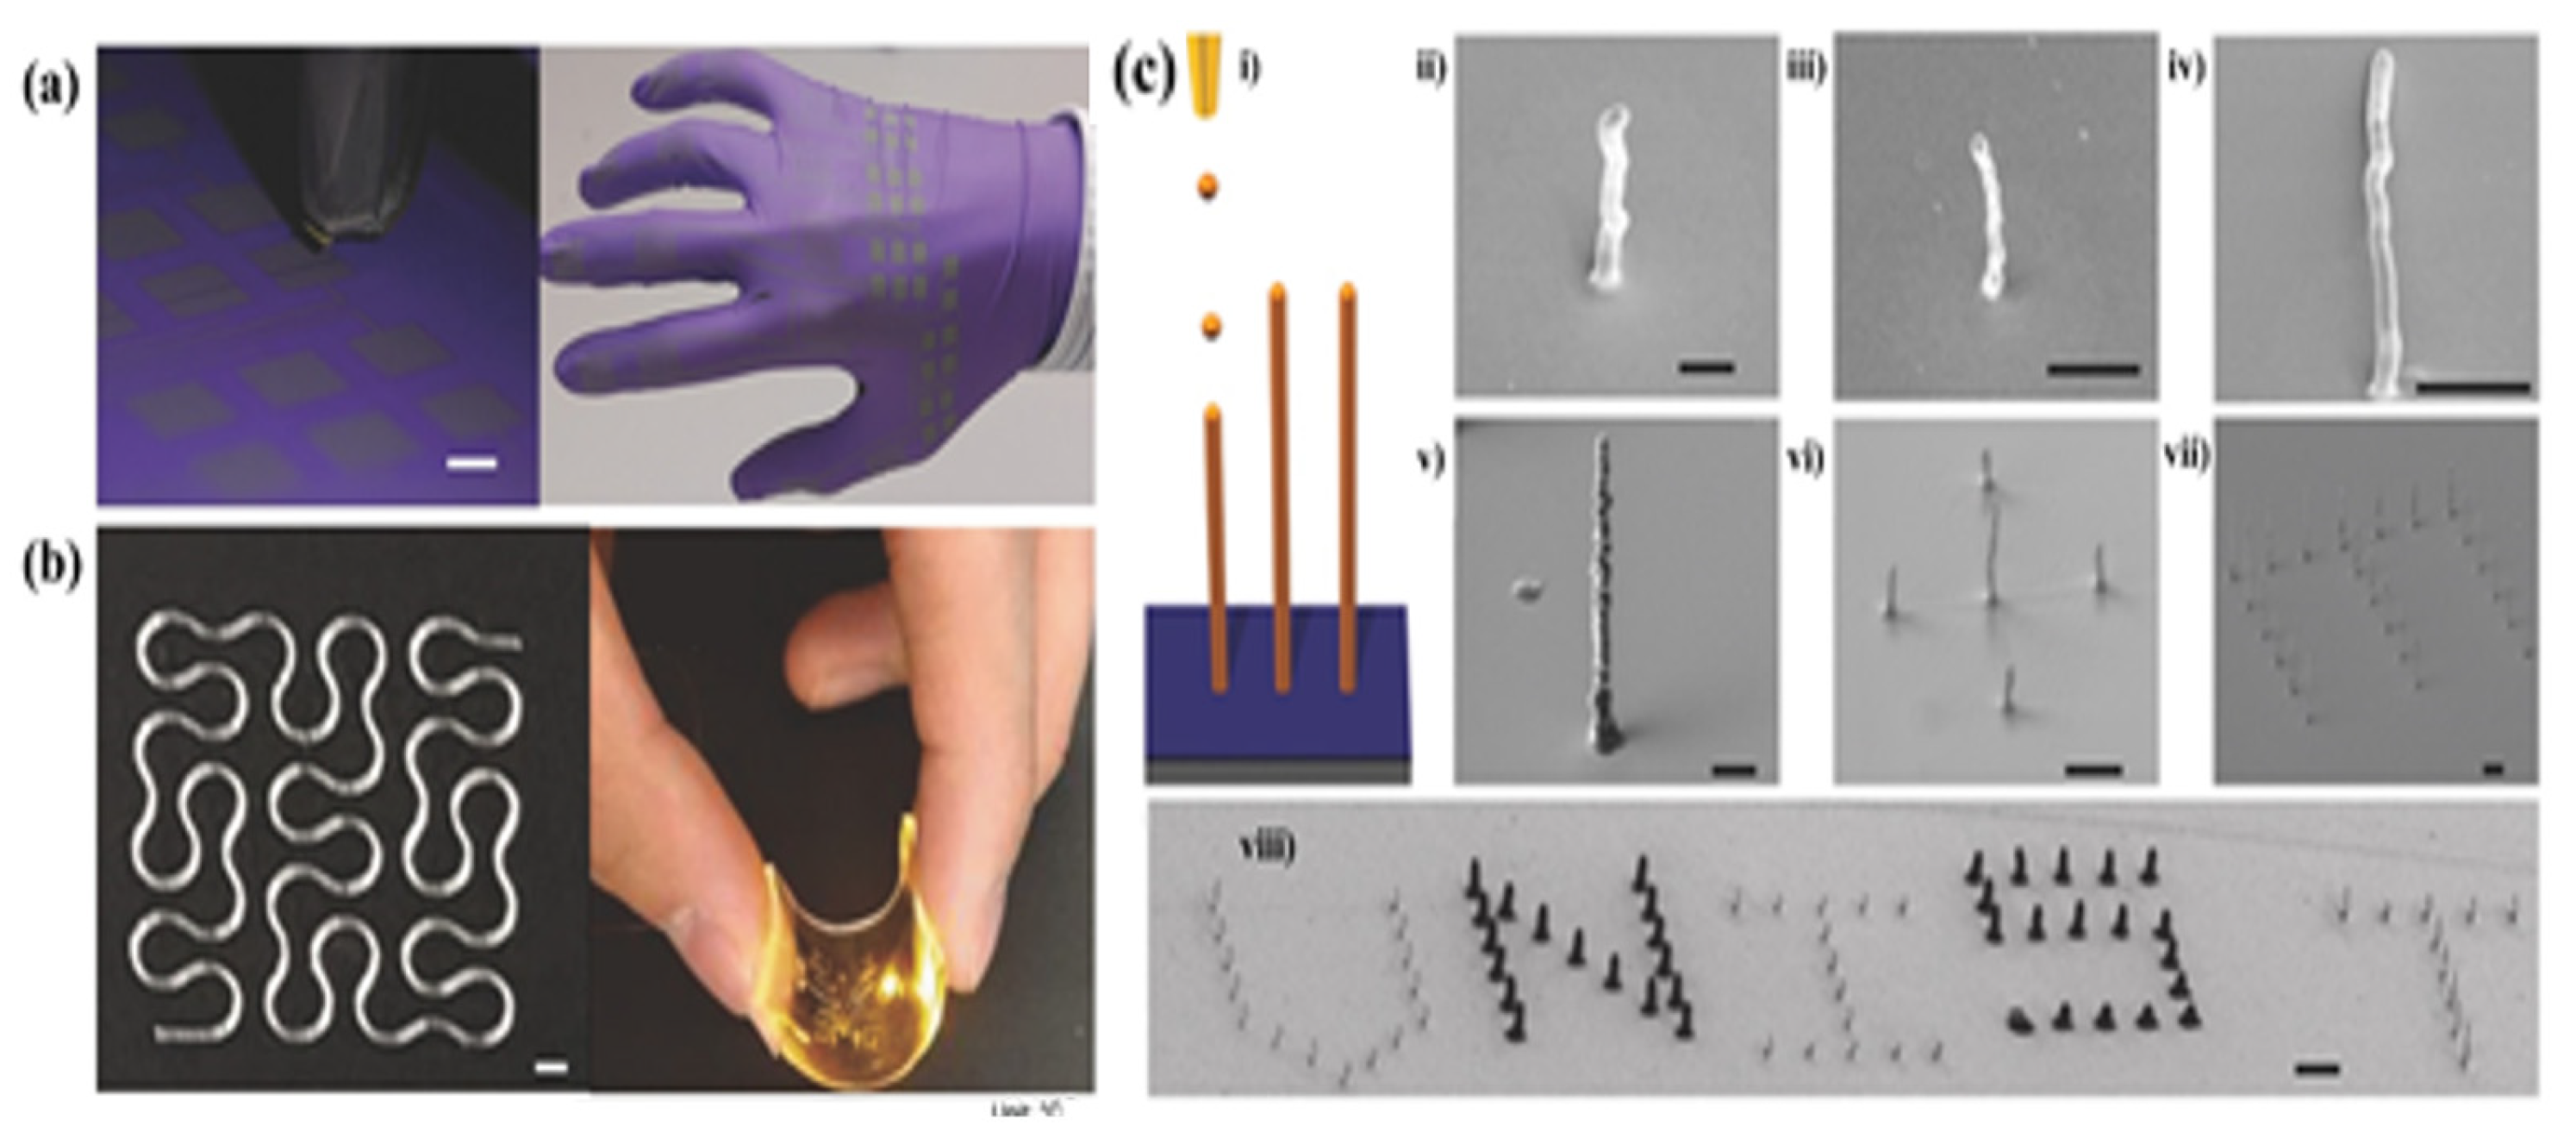 Multimodal Augmentation of Surfaces Using Conductive 3D Printing